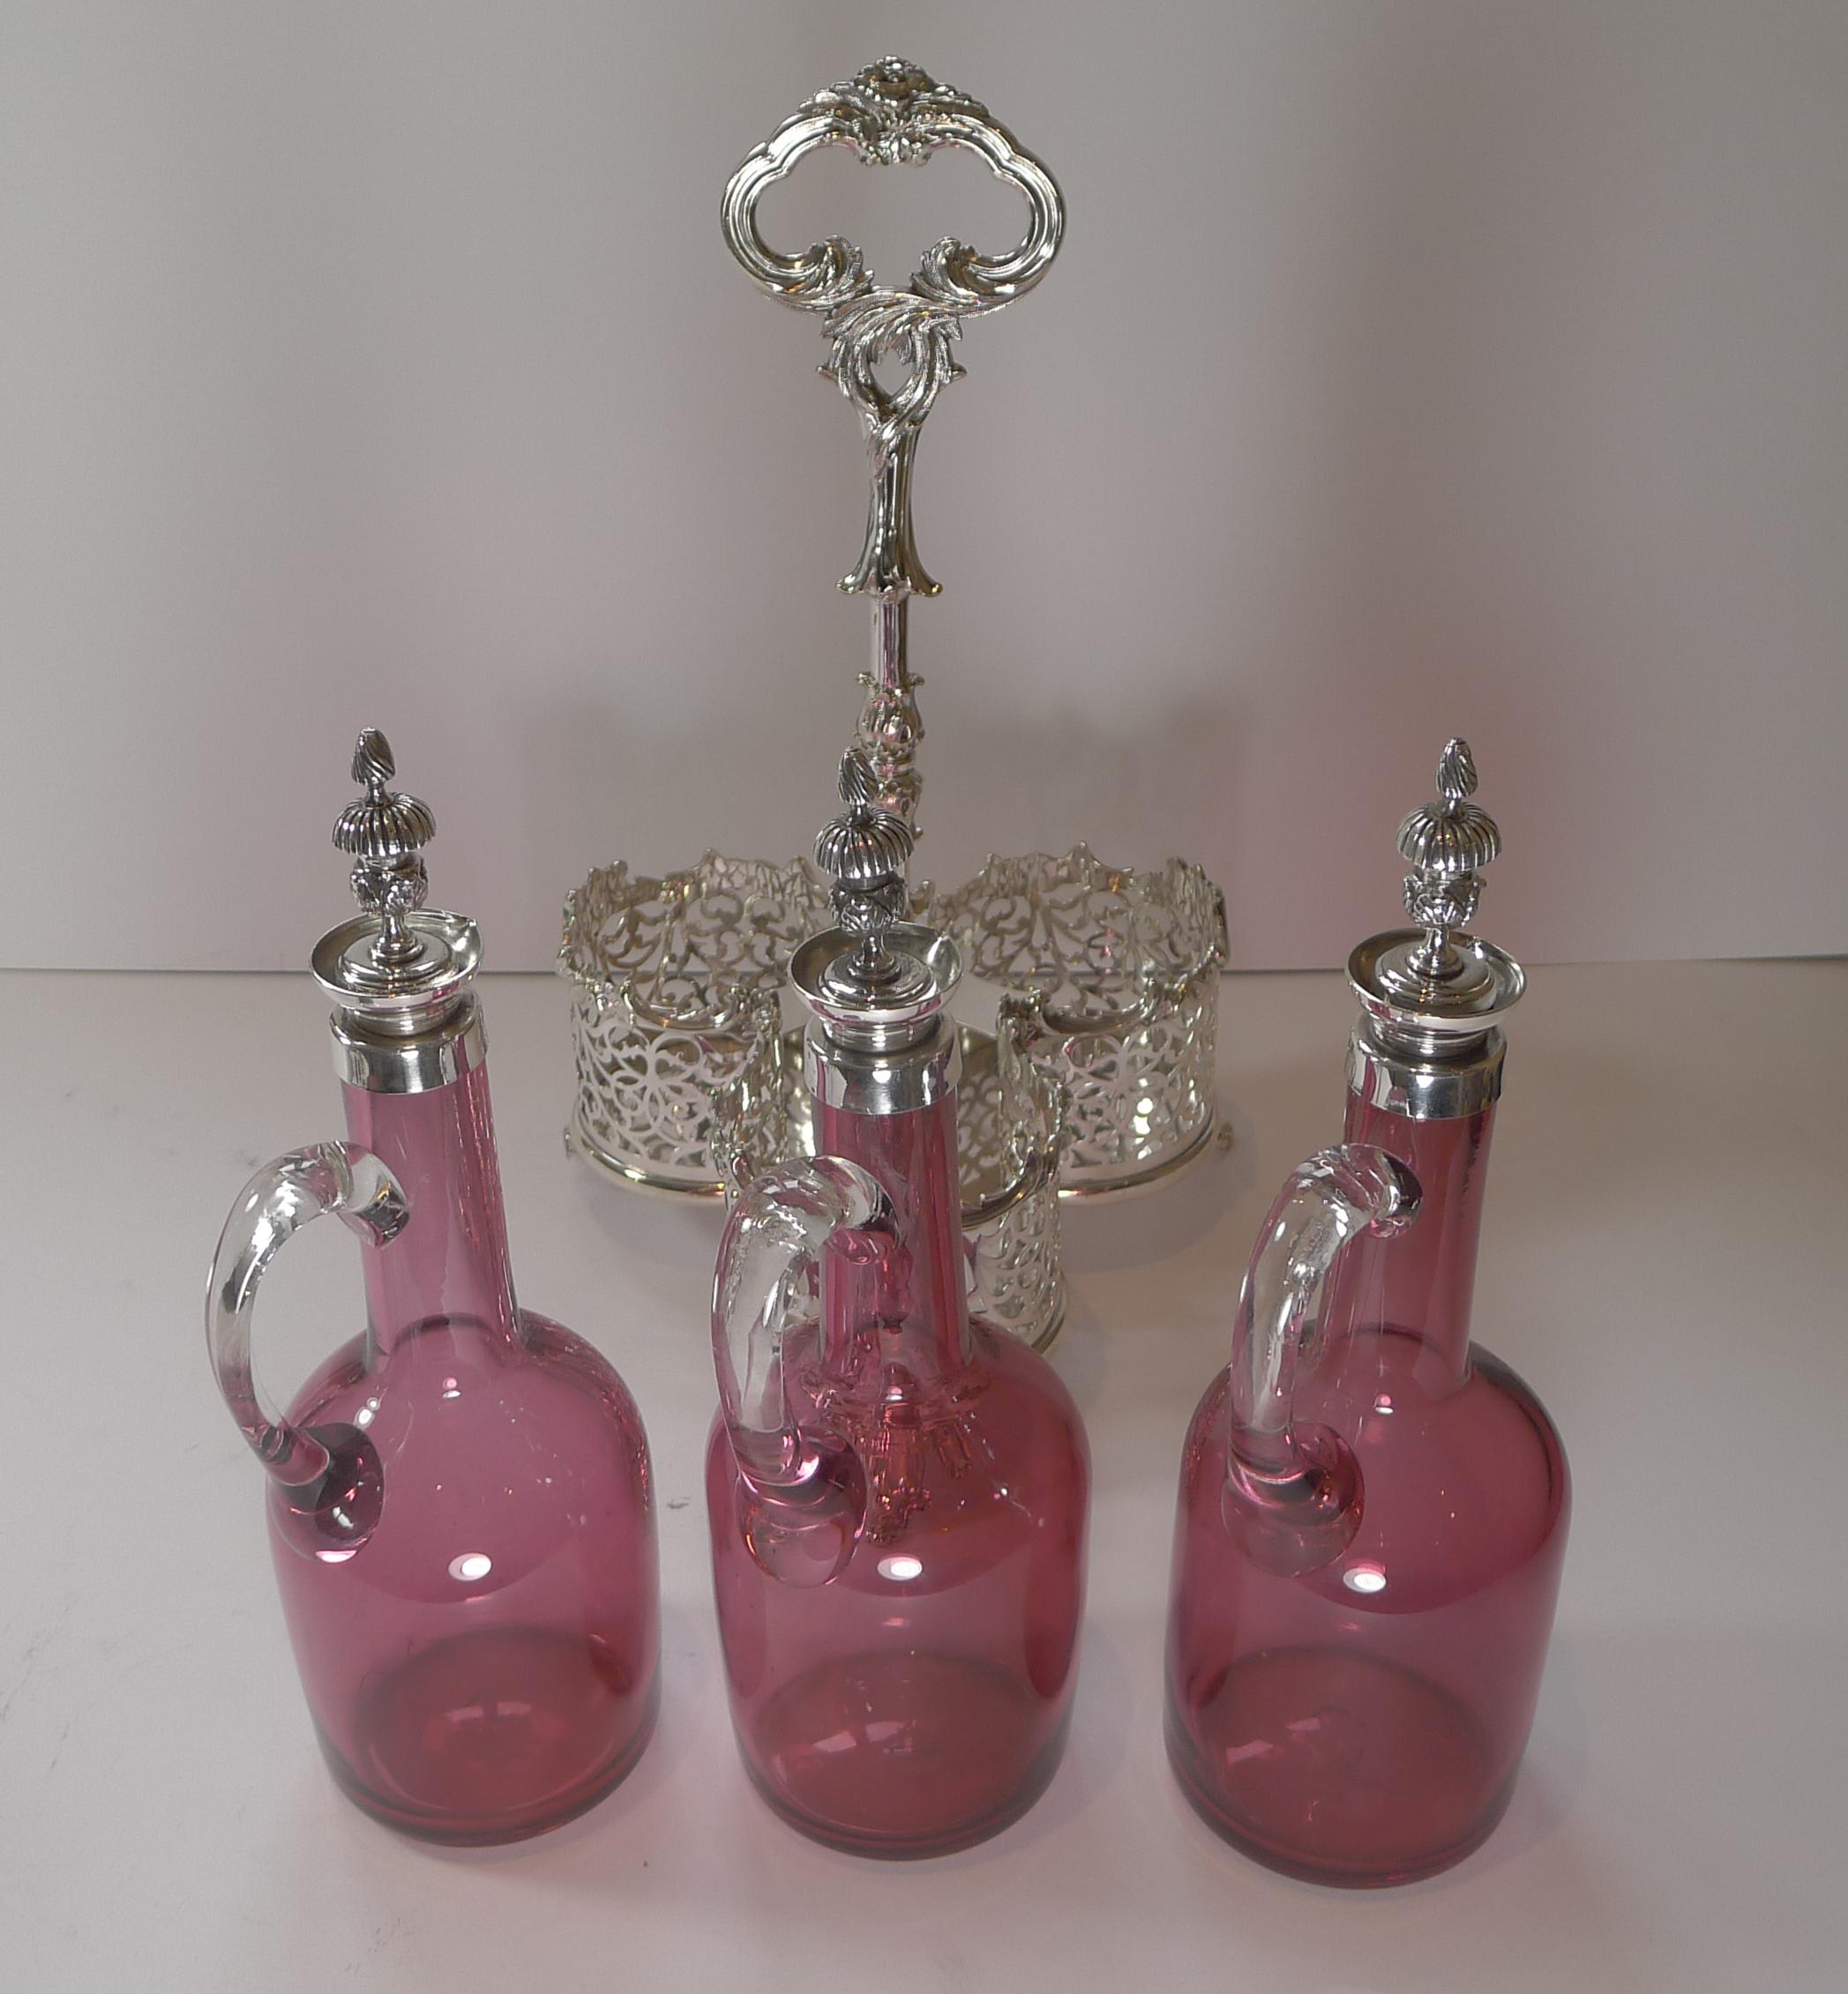 Stunning Cranberry Glass and Silver Plate Decanter Set c.1890 In Good Condition For Sale In Bath, GB